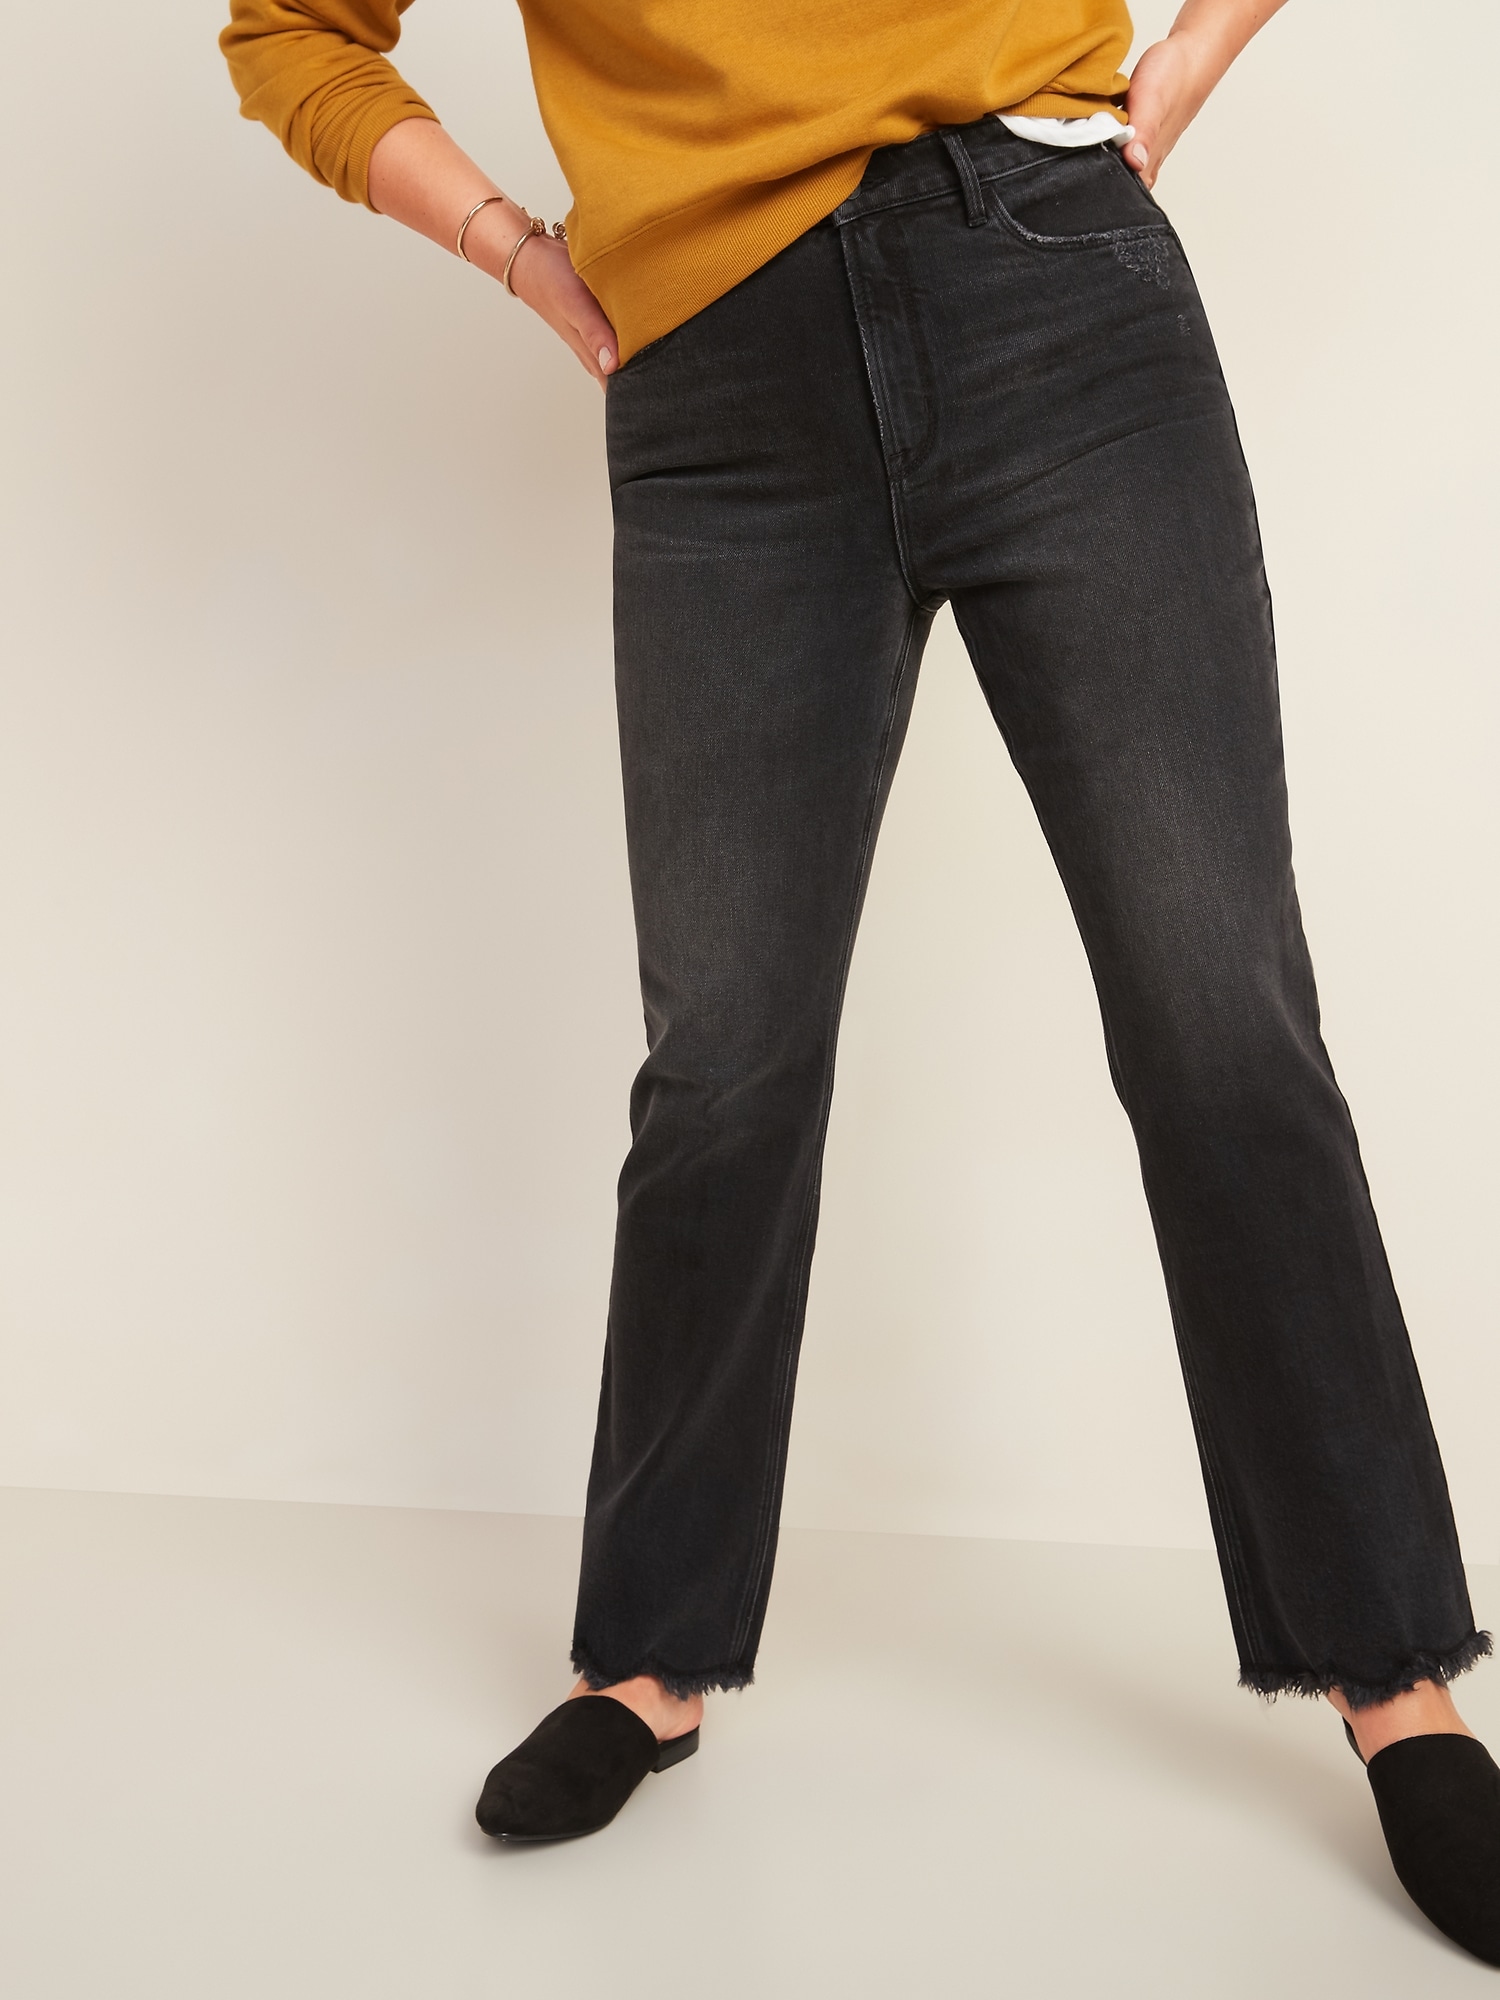 High-Waisted Flare Black Cut-Off Ankle Jeans for Women